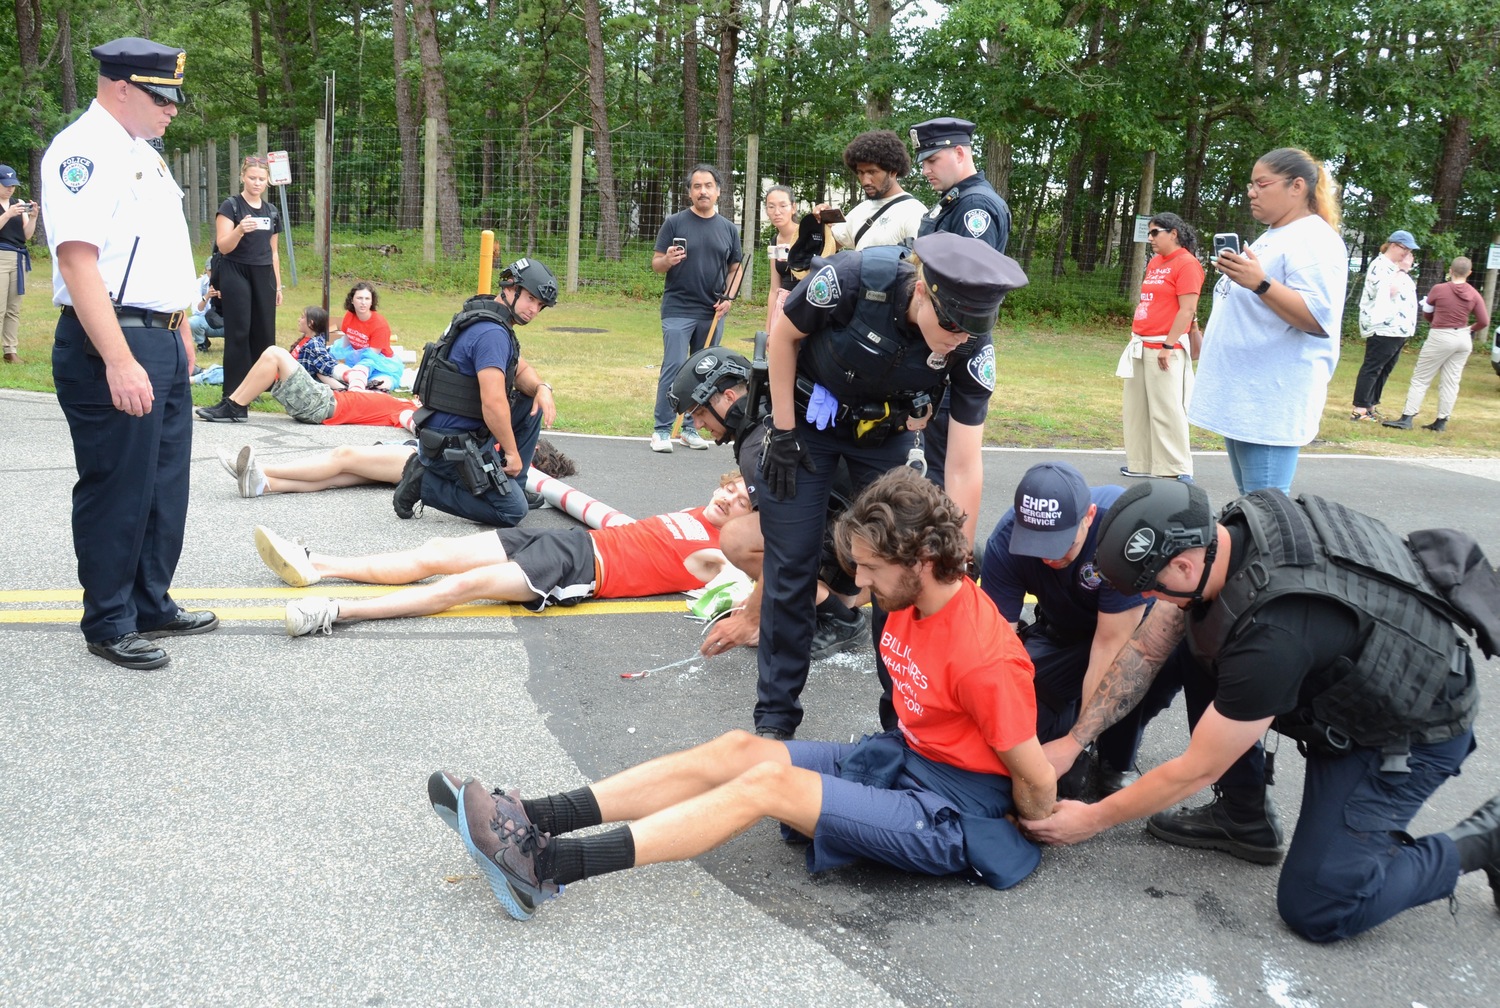 Protesters attempted to block access to East Hampton Airport on Friday afternoon, to protest the outsized contribution that private aircraft usage has on climate change.   KYRIL BROMLEY